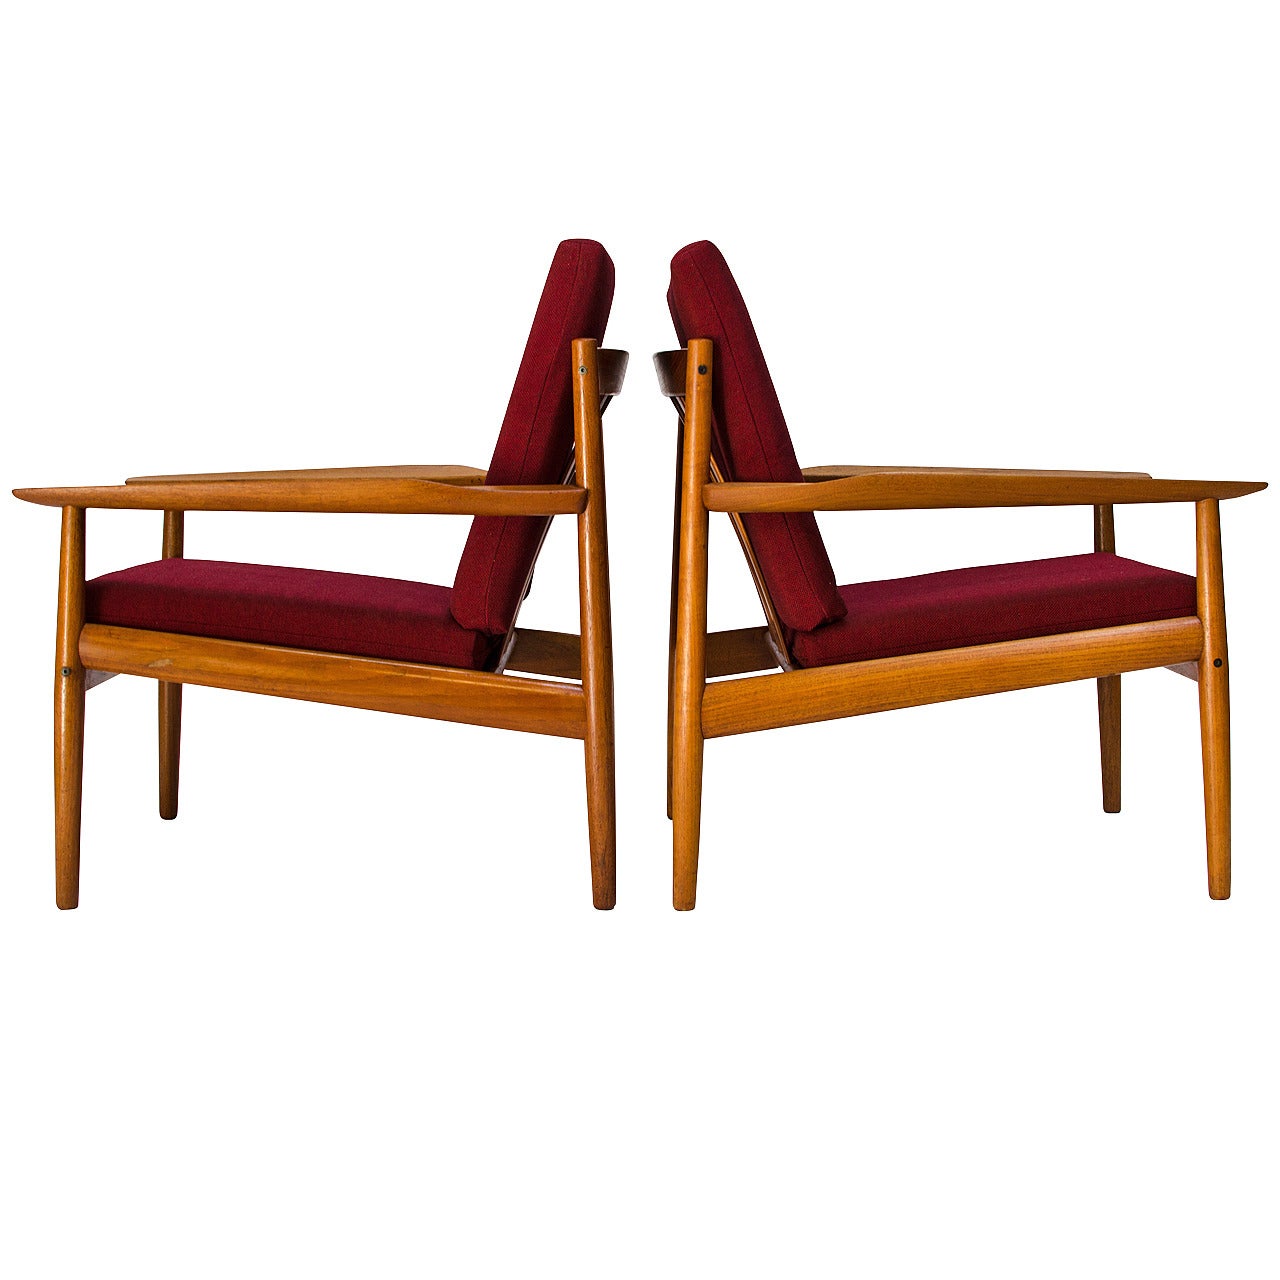 Arne Vodder for Glostrup Teak Easy Chairs, 1960s For Sale